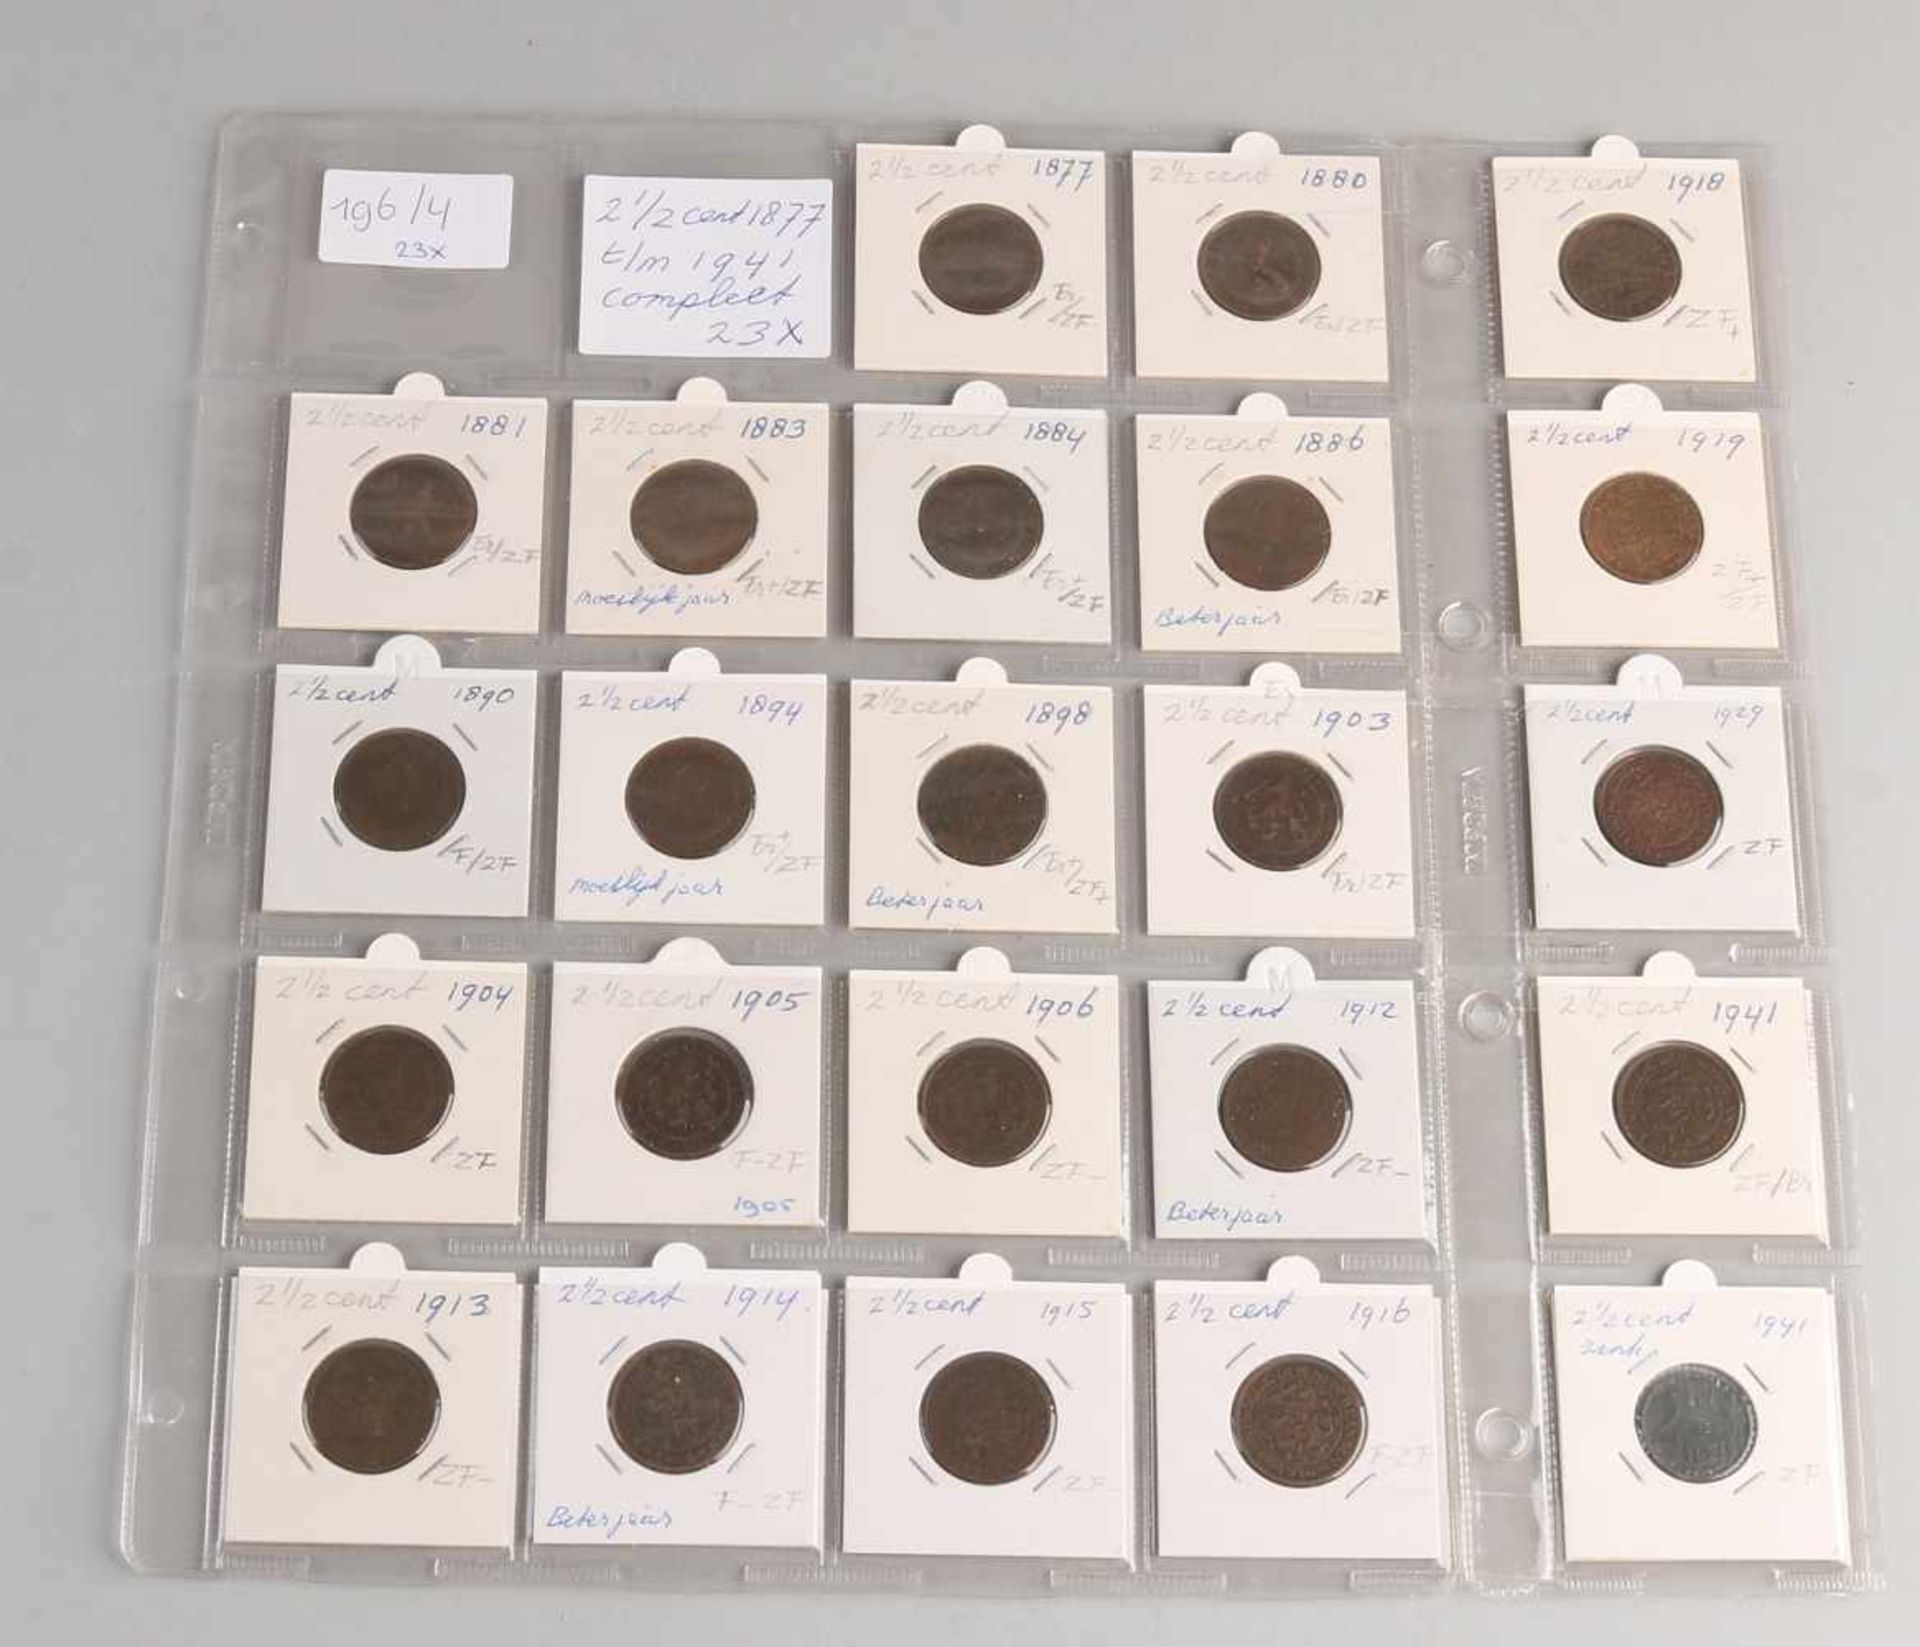 23x 2½ Cent 1877 t / m 1941. Complete. In good condition.<